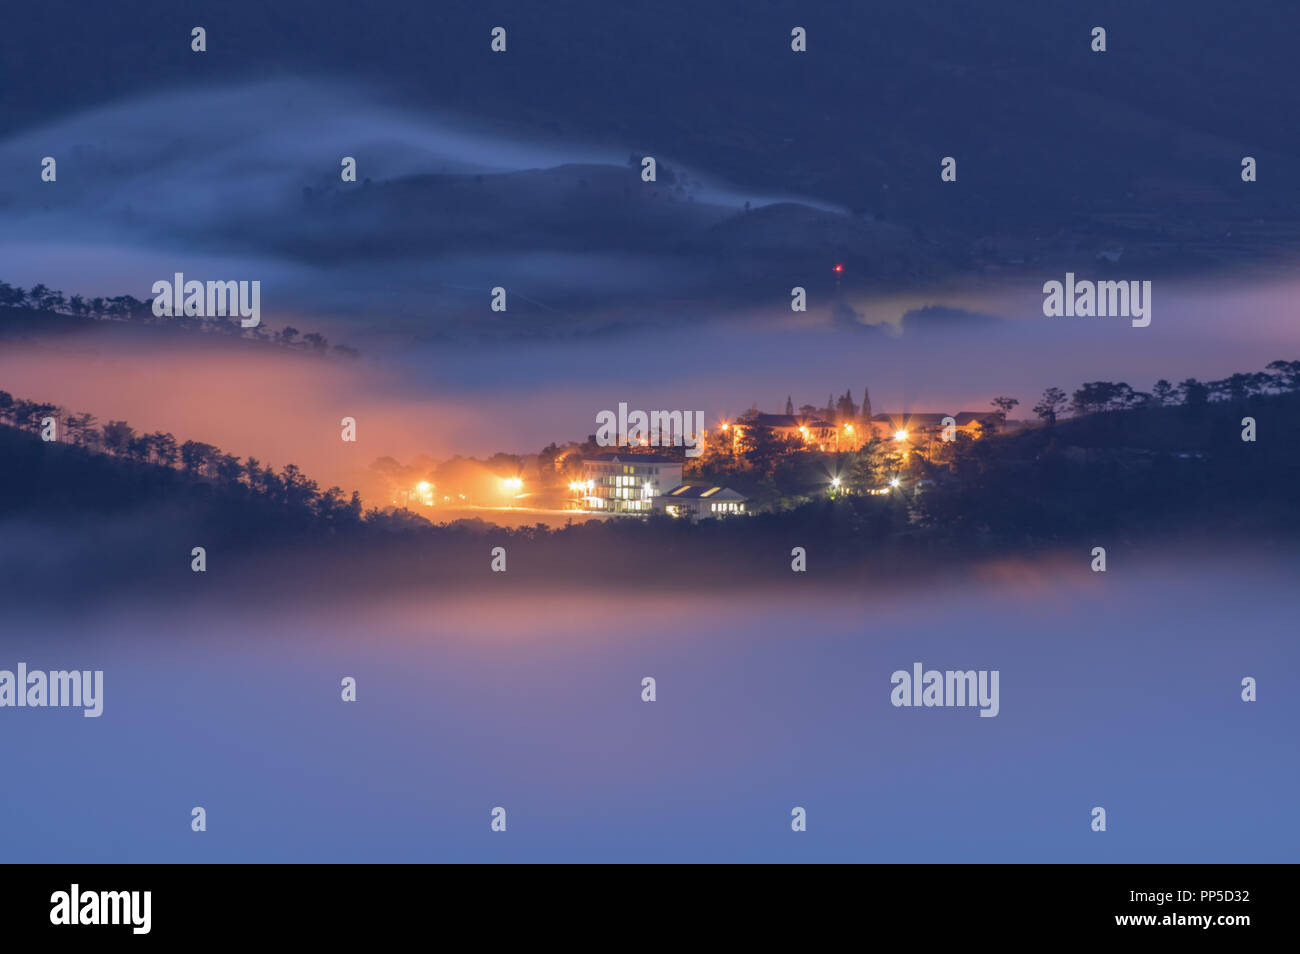 Long exposure with magic of the fog cover town and light at night, artwork of the landscape nature, pictures used in the design, advertising, travel, Stock Photo